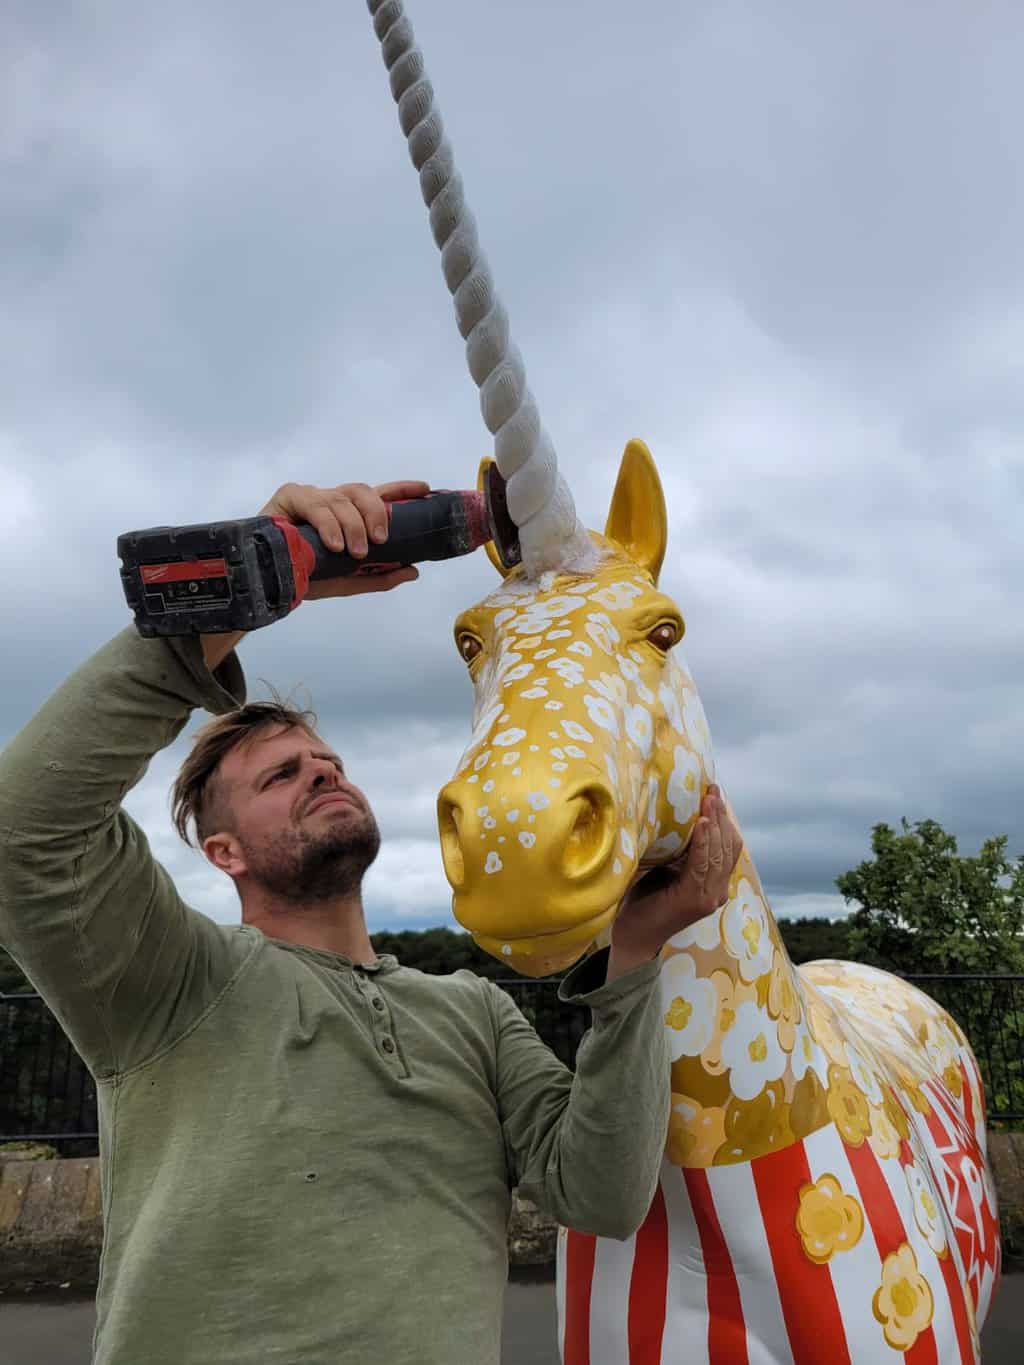 Popcorn being given a new horn in Clifton downs after it was stolen.